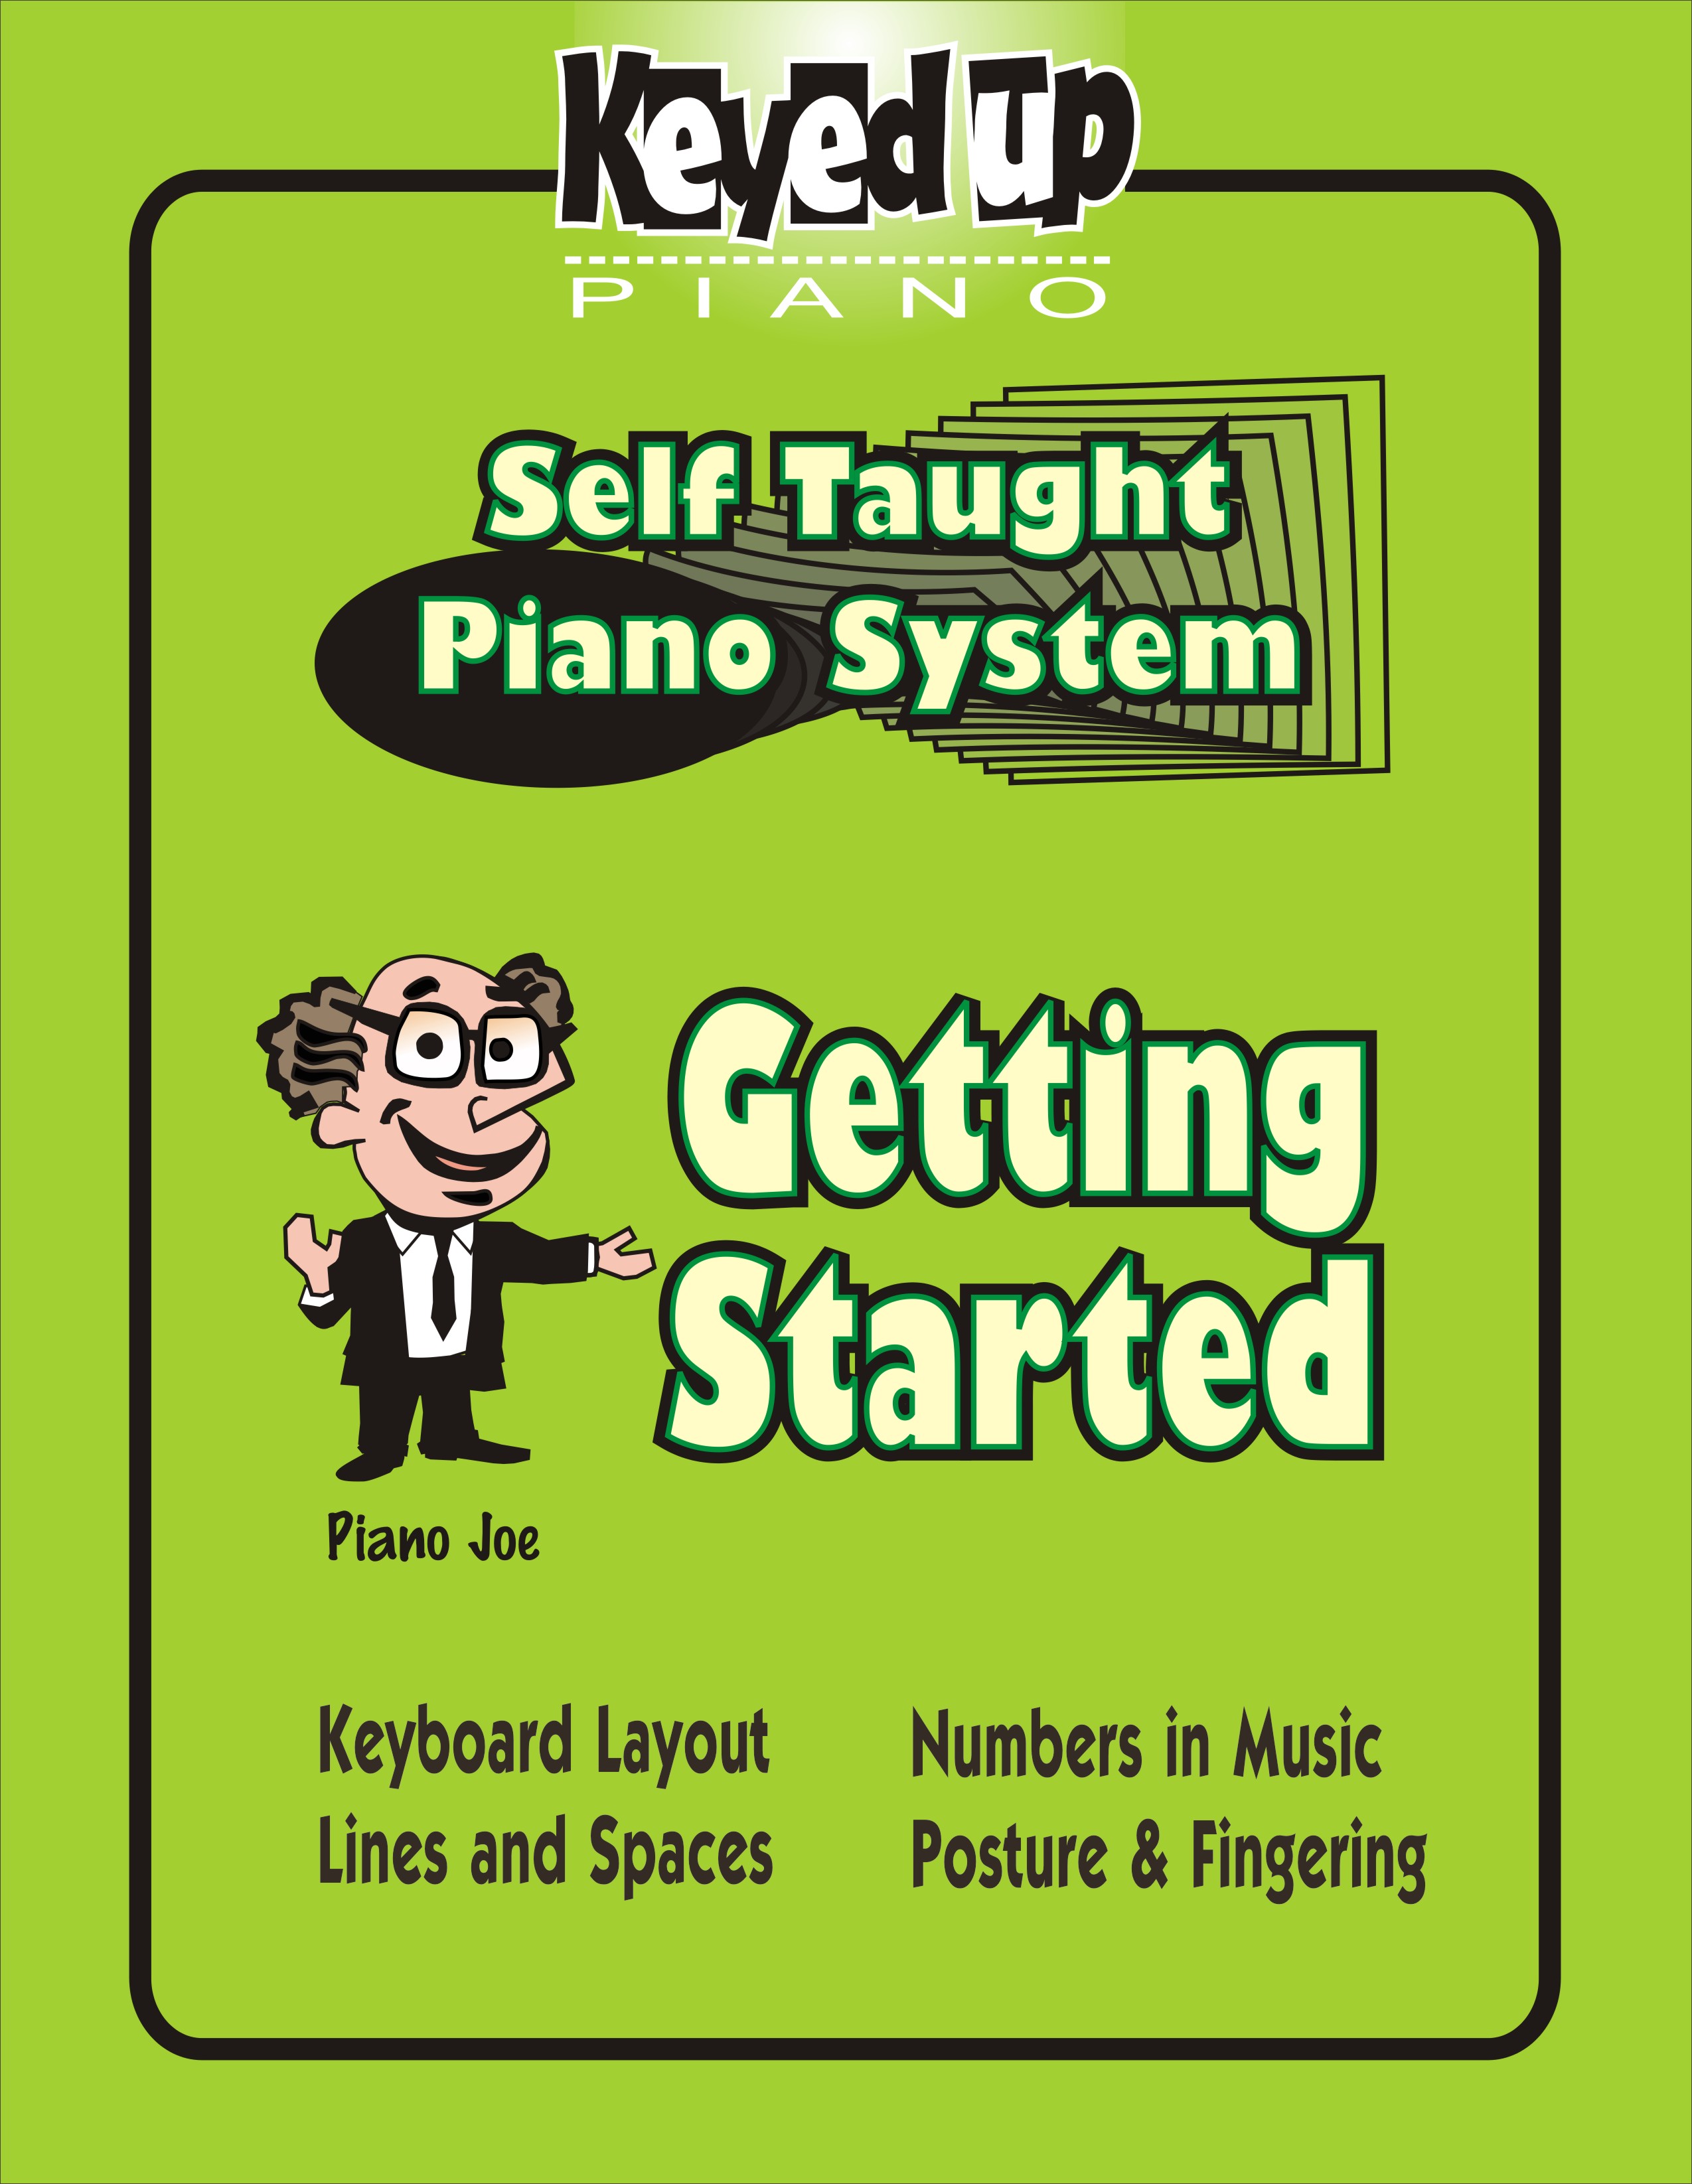 Free lessons - Learning the keyboard